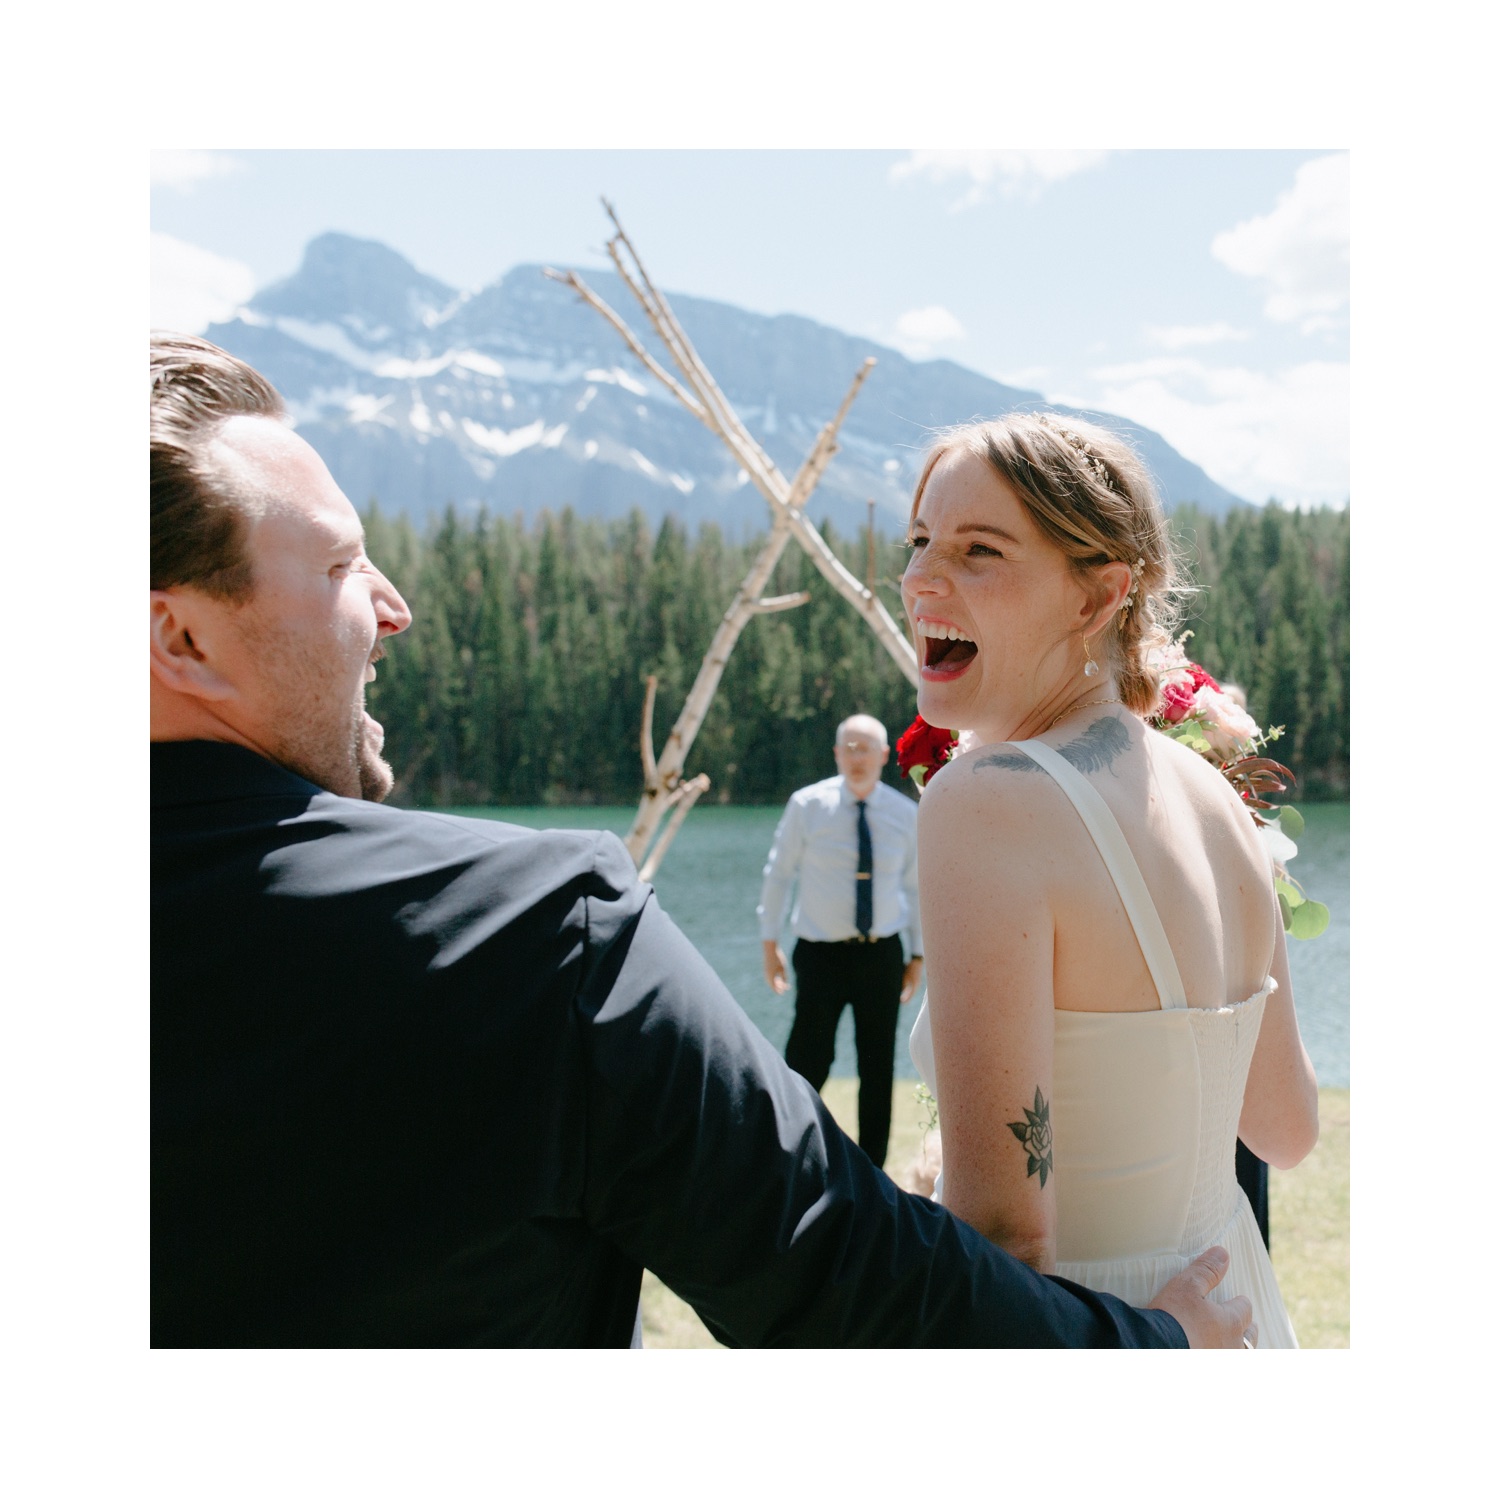 Soon to be married couple embrace and look at each other with absolute joy and excitement after her father set up a birch altar in Banff